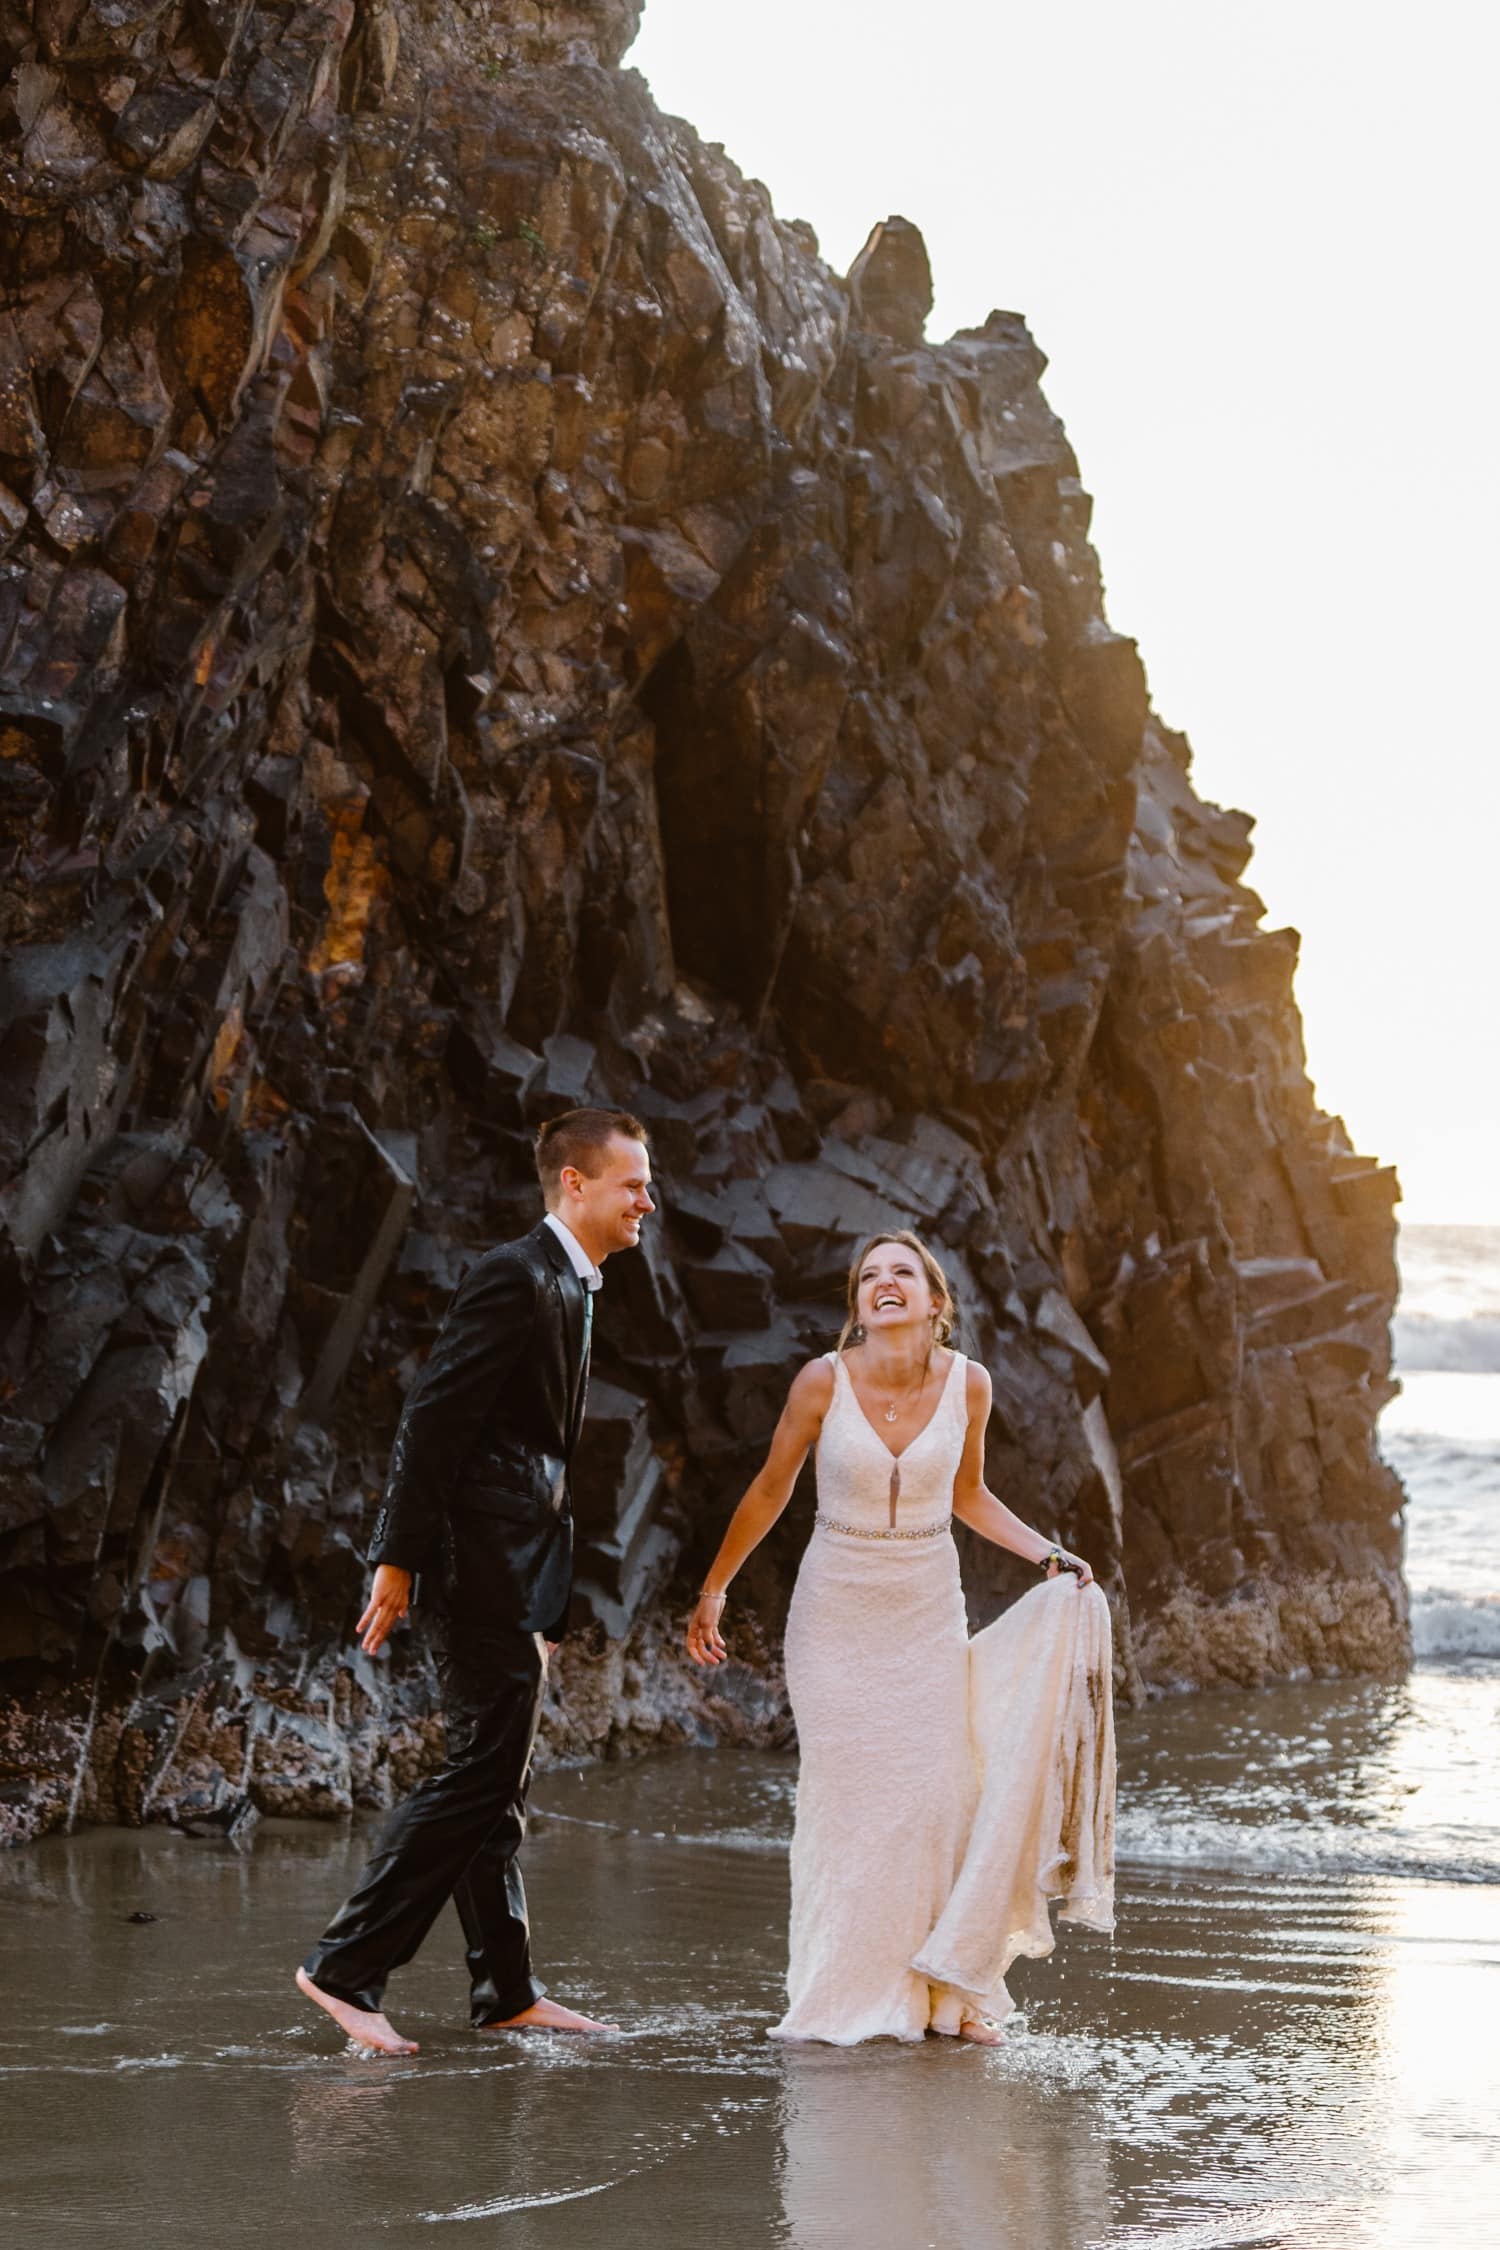 Bride and Groom soaked in ocean water at Hug Point & Cannon Beach Elopement